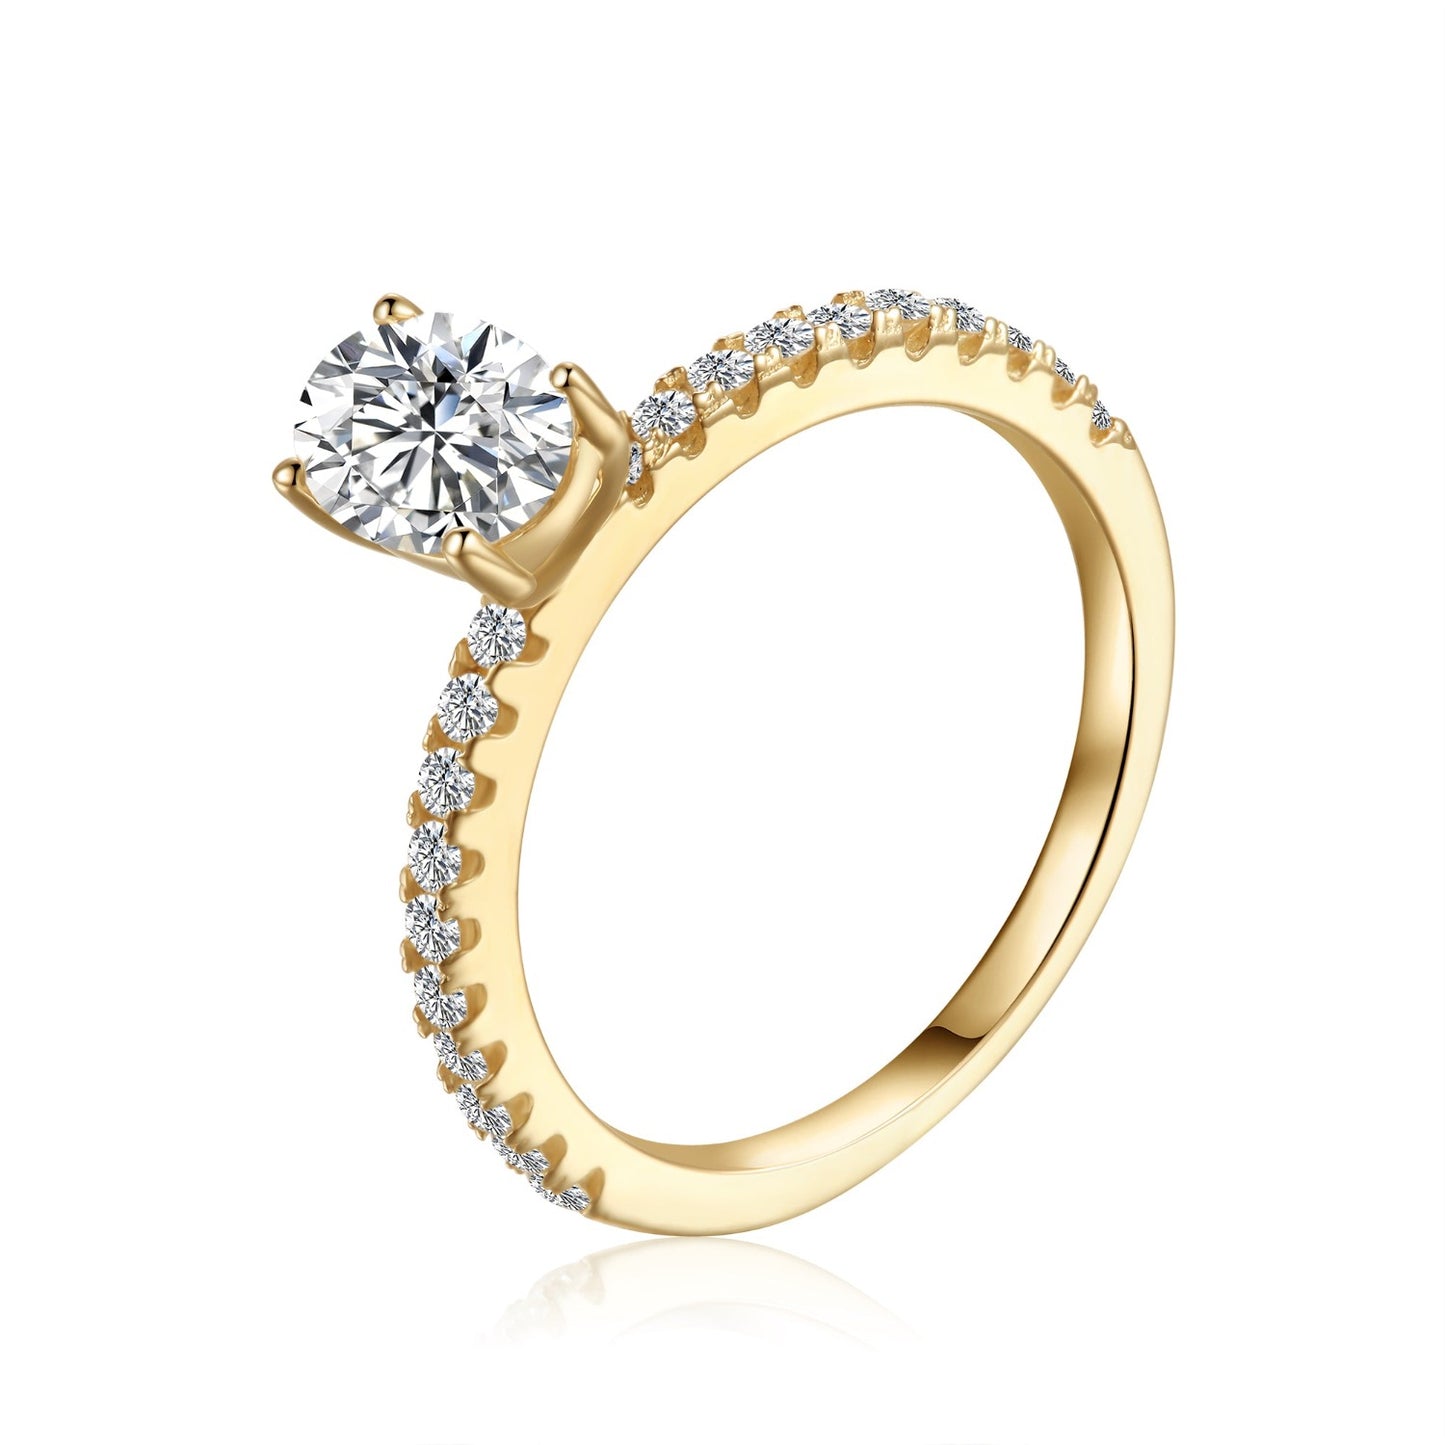 Elegant 1.00ct Oval Cut Moissanite Engagement Ring Set in 9ct Yellow Gold